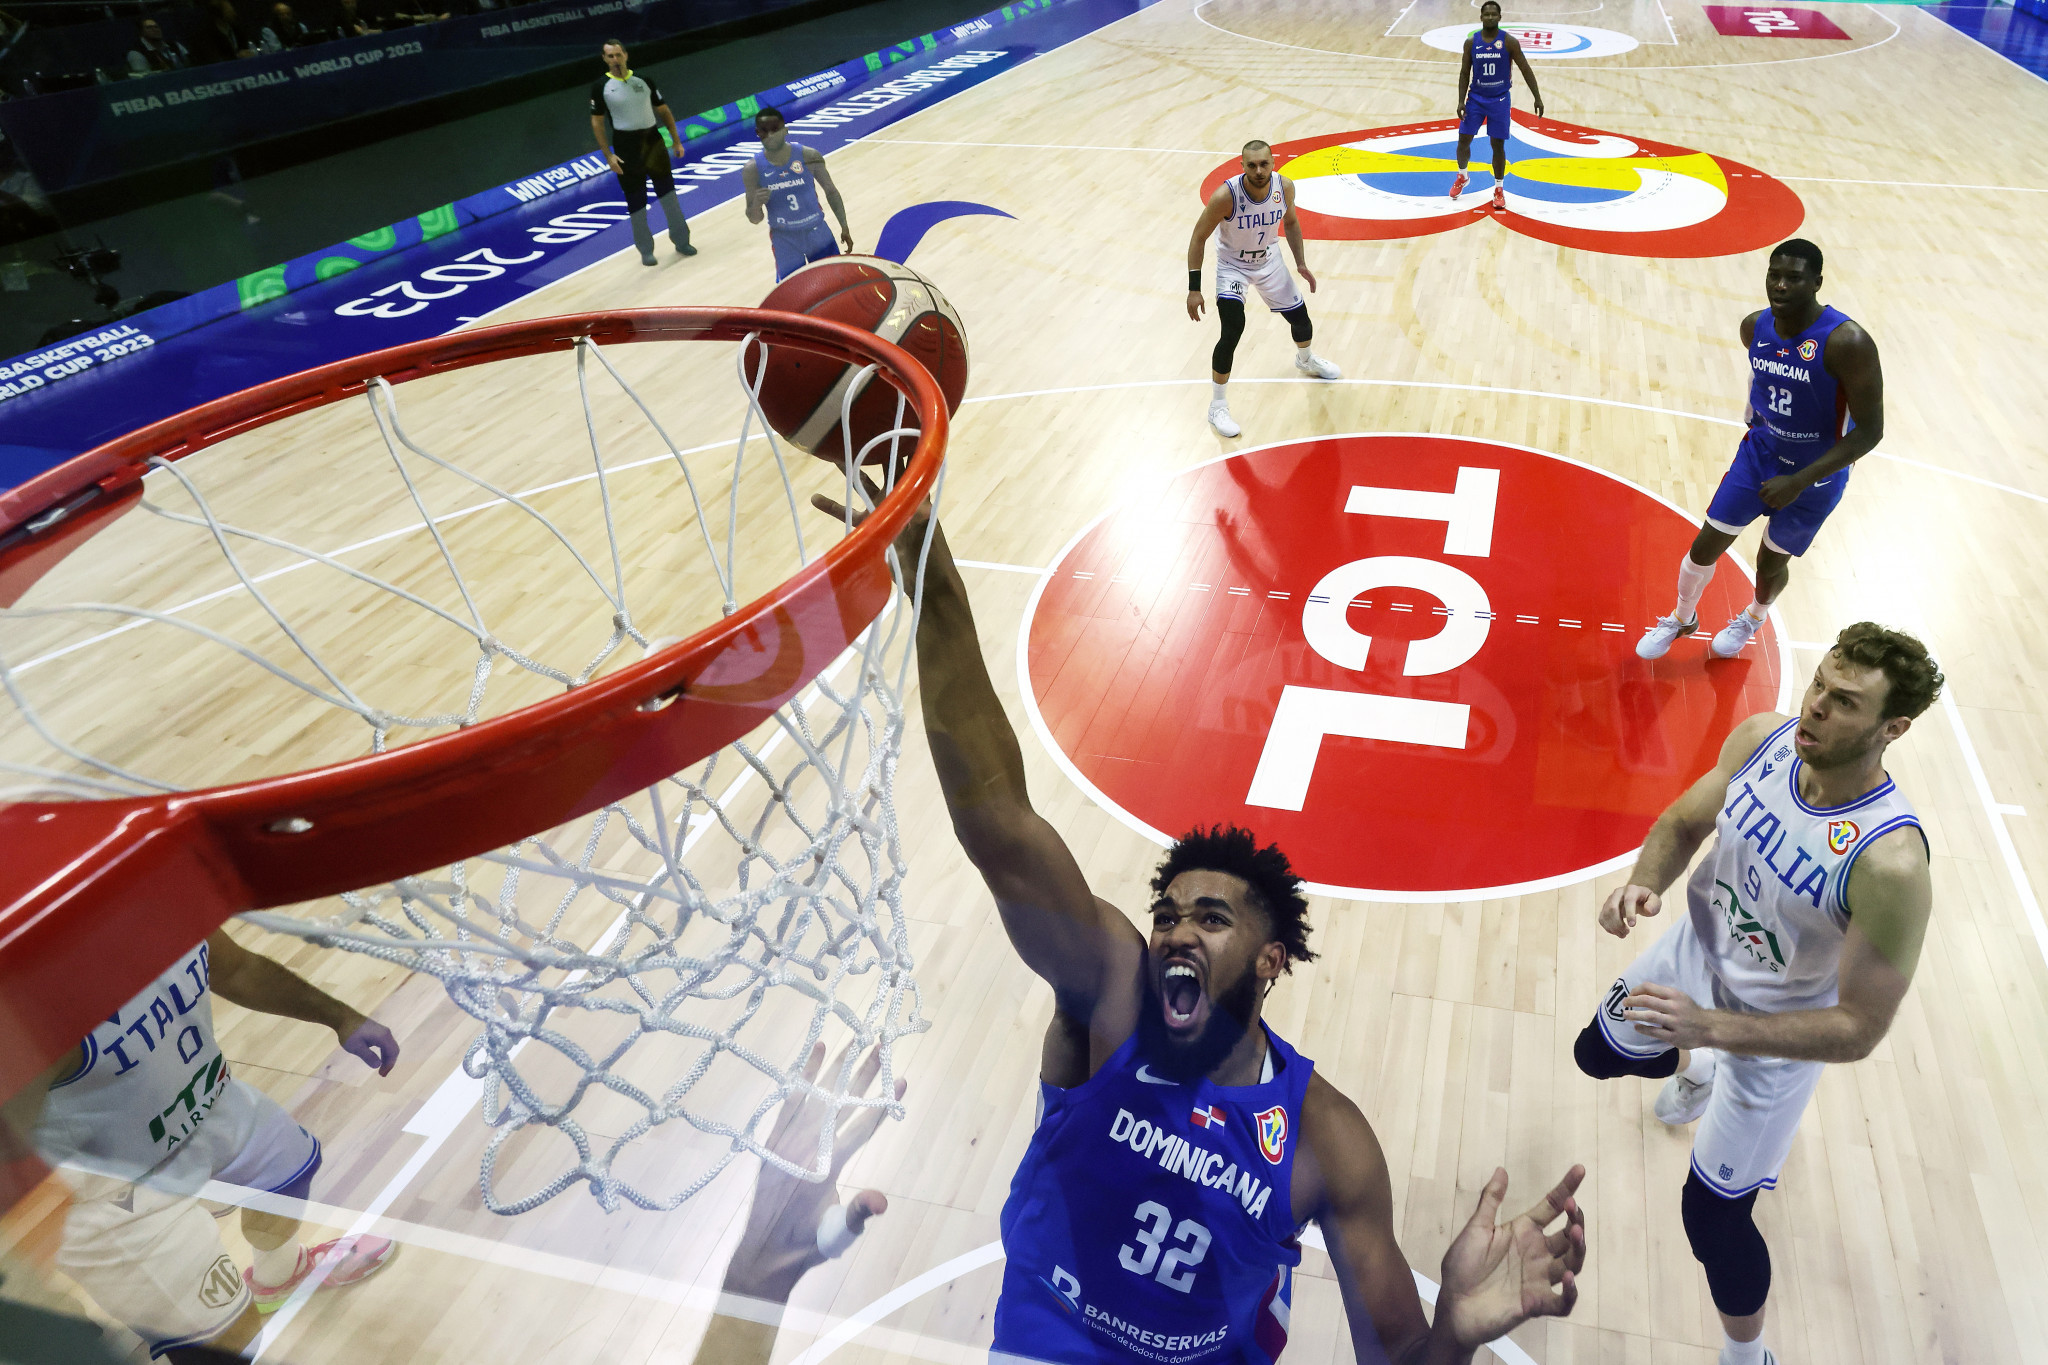 Karl-Anthony Towns scored 24 points for the Dominican Republic as they beat Italy 87-82 in Group A ©Getty Images